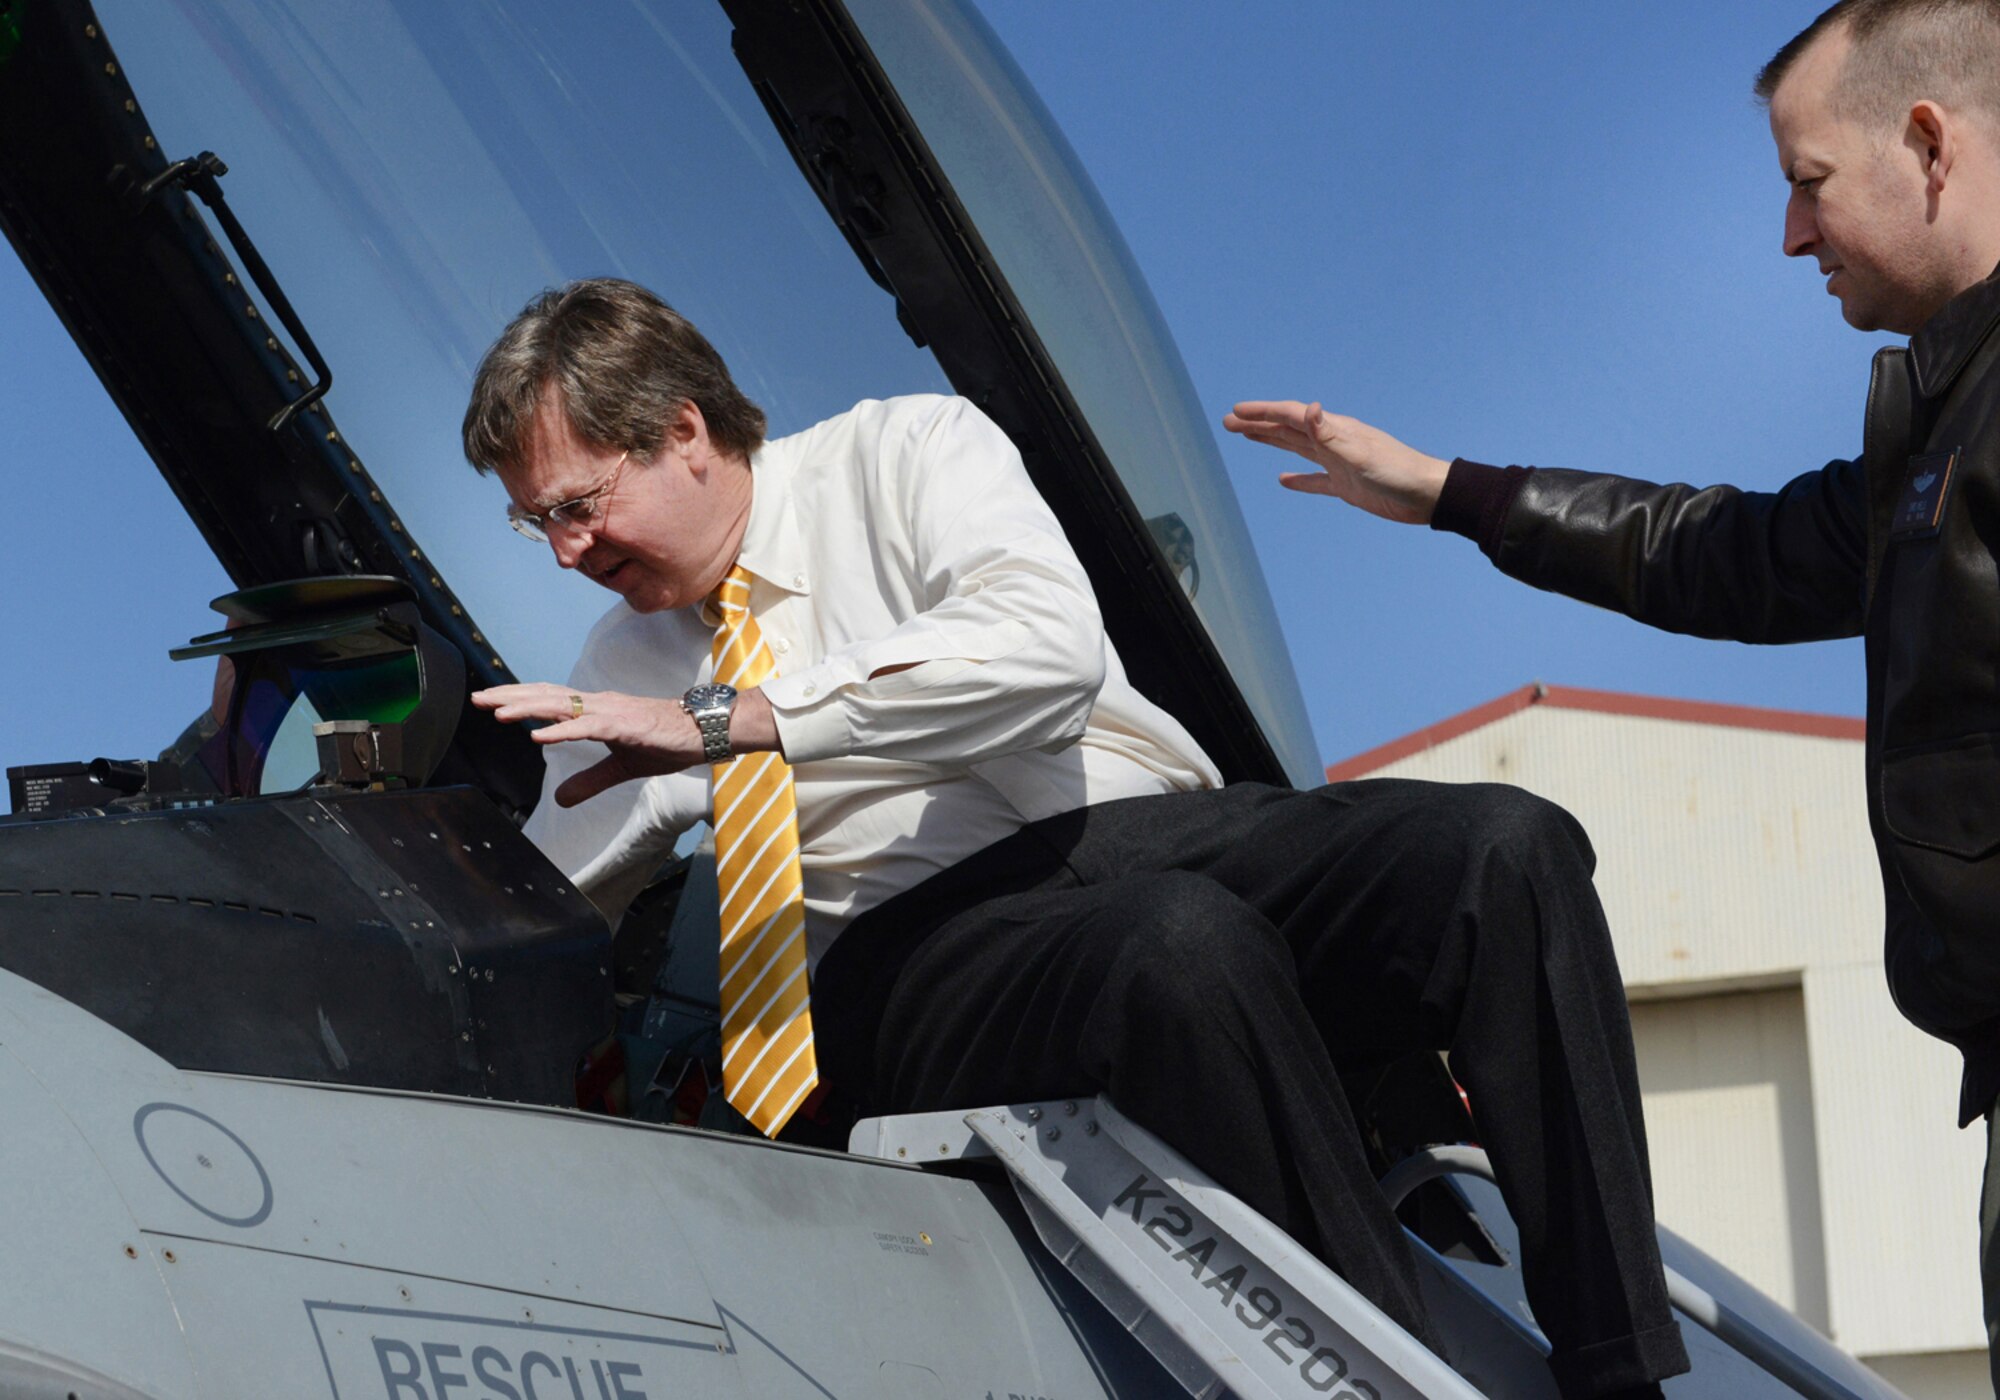 Maj. Chris Wells explains proper and safe entry into an F-16 Fighting Falcon cockpit to Tulsa Mayor Dewey F. Bartlett, Jr. during a visit February 25, 2015 at the Tulsa Air National Guard base, Tulsa, Okla. The mayor was hosted by 138th leadership as a community outreach event aimed at fostering good relations and educating local leaders on the mission of the wing.